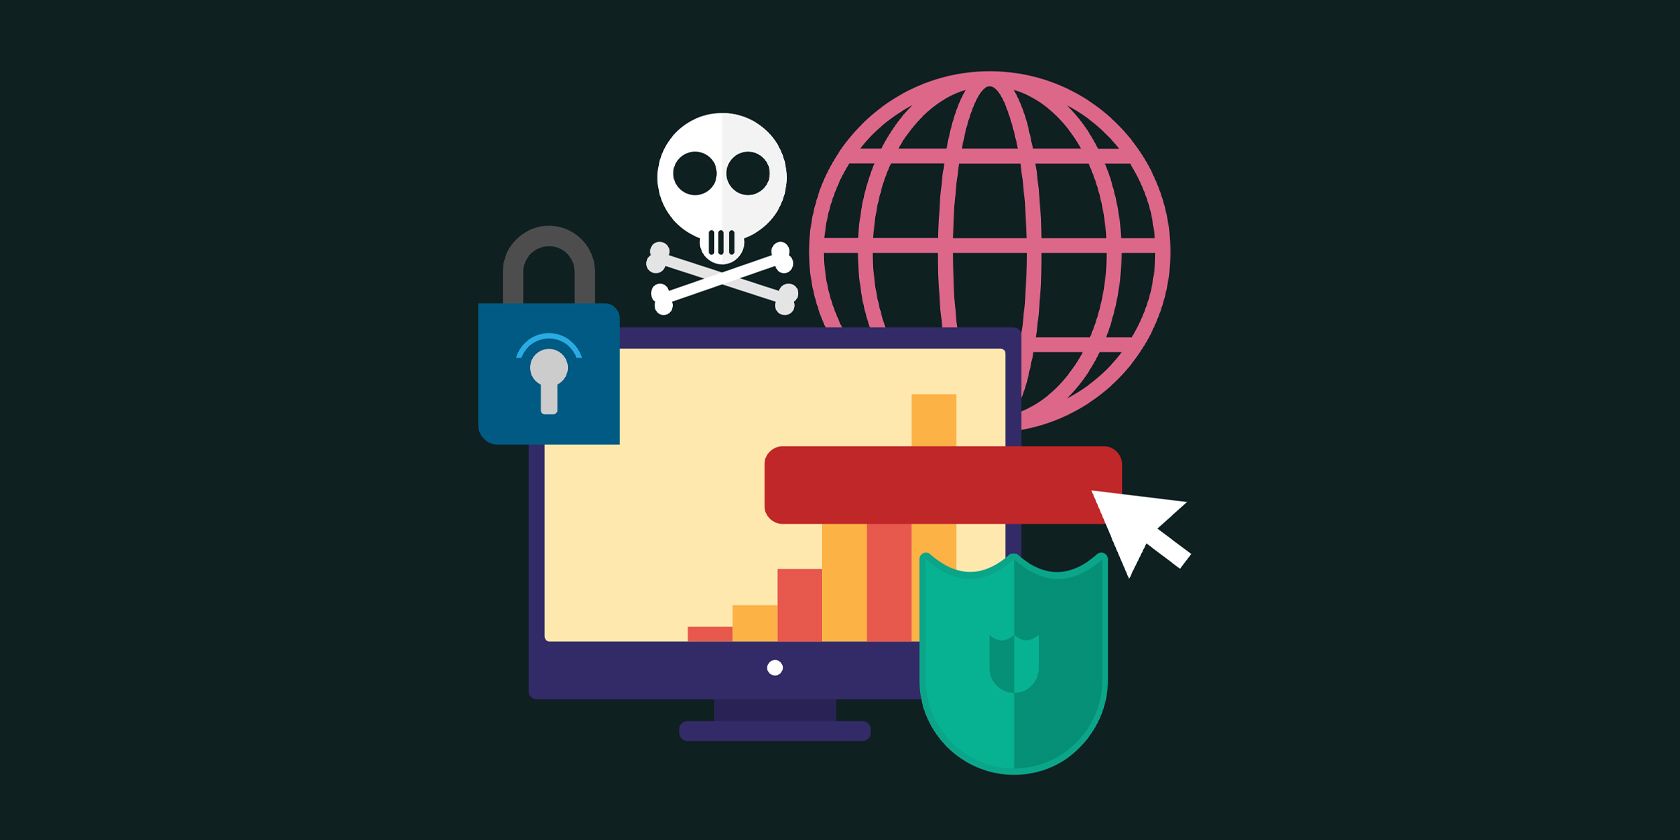 Protecting intellectual property and bypassing geo-blocking